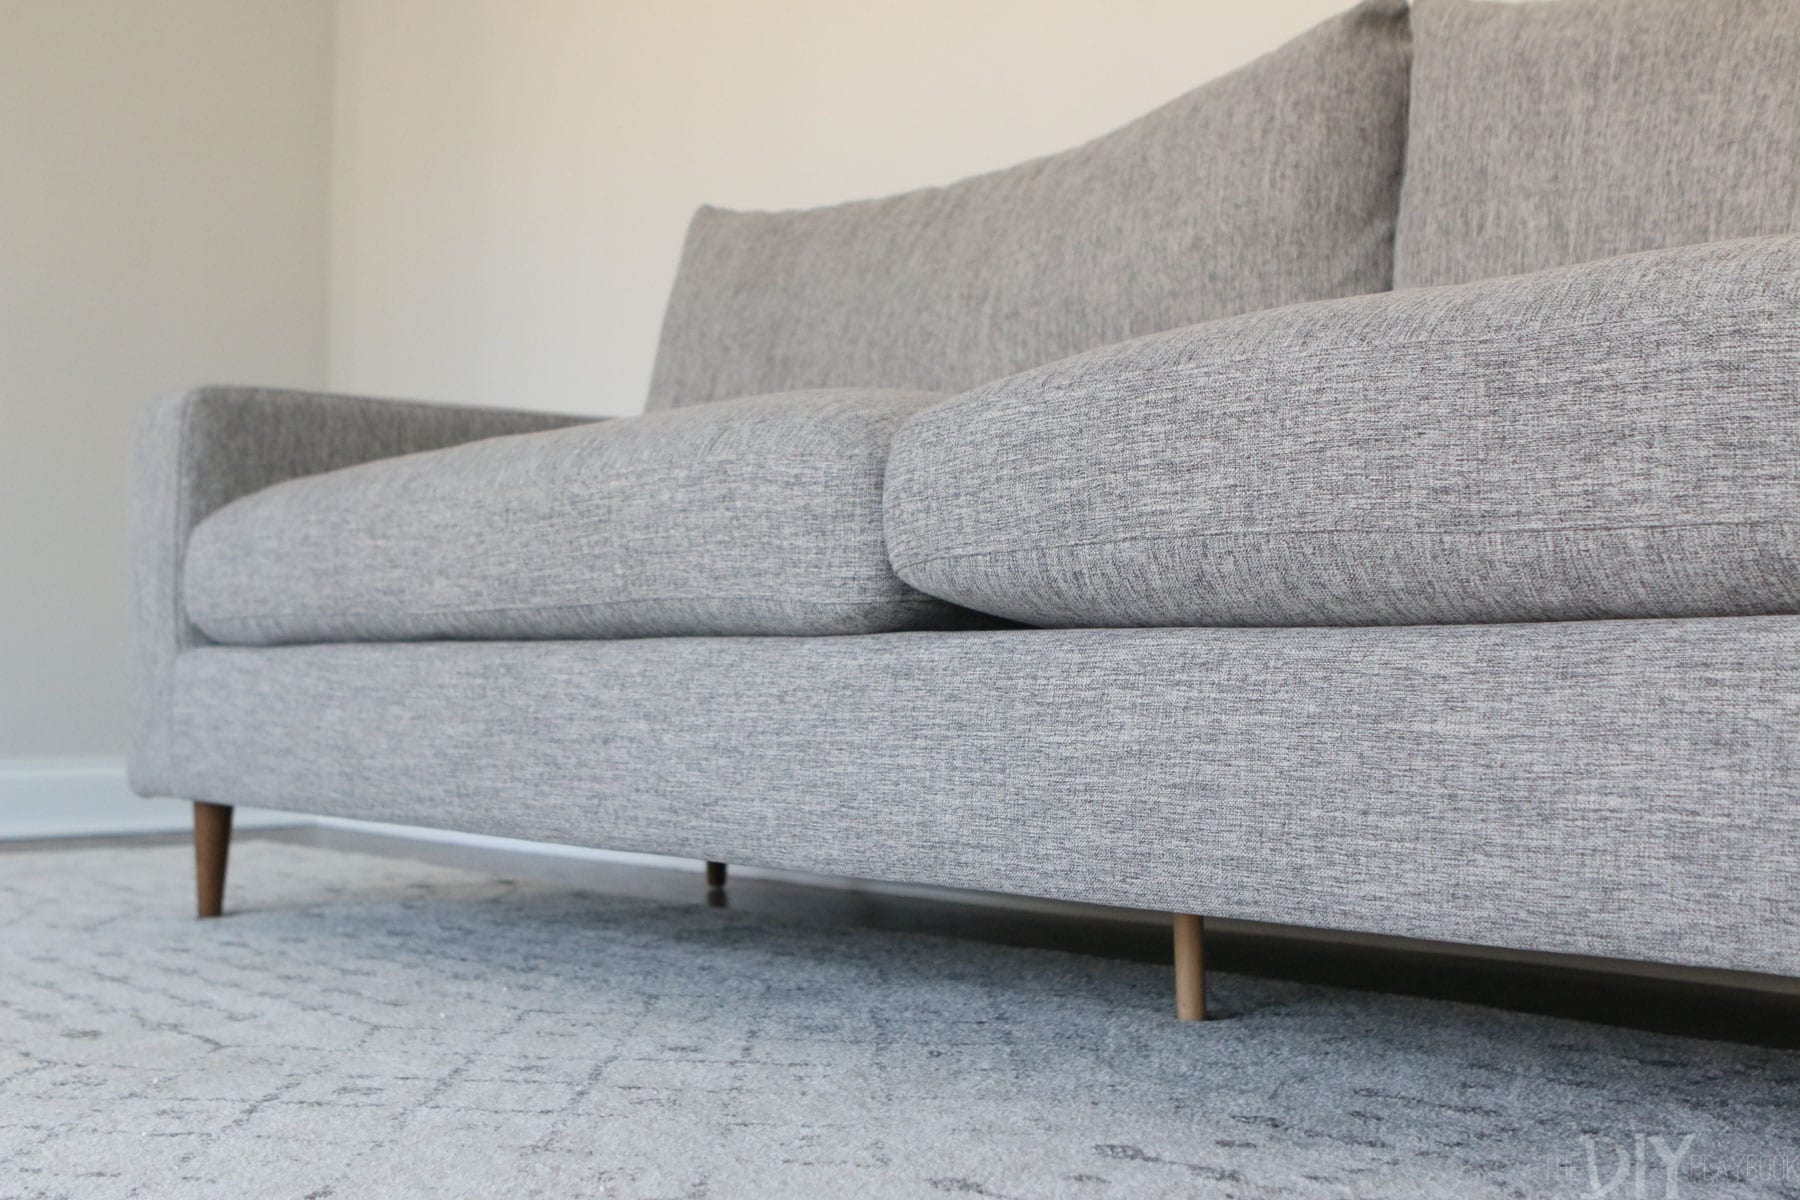 Choosing legs on an interior define sofa will allow you to customize the style for no extra cost